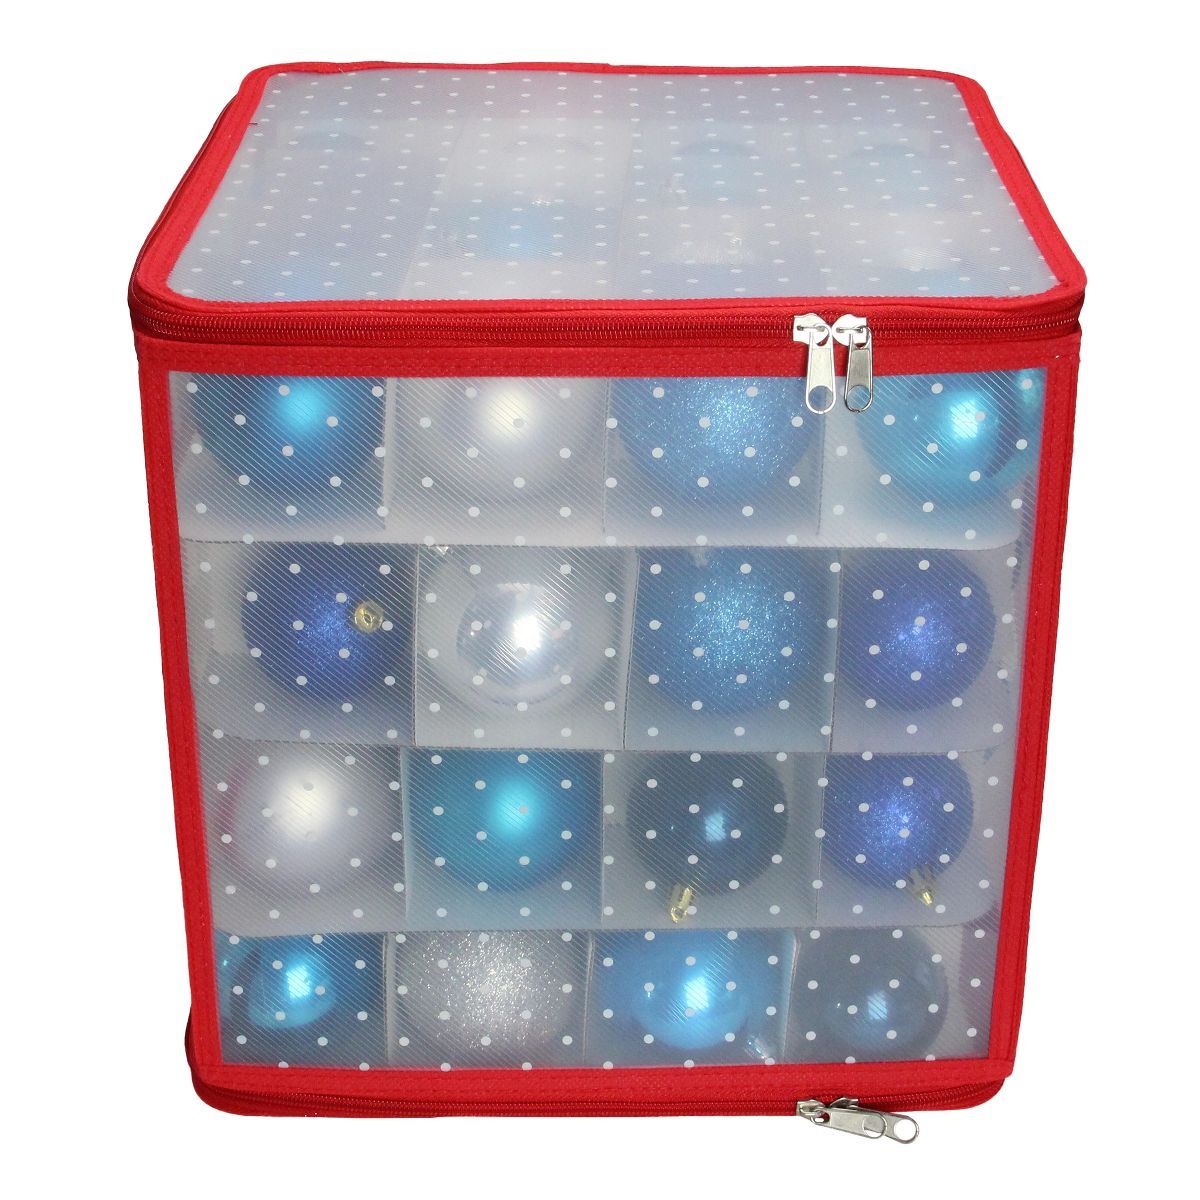 Northlight 12.5" Transparent Zip Up Christmas Storage Box - Holds 64 Ornaments | Target